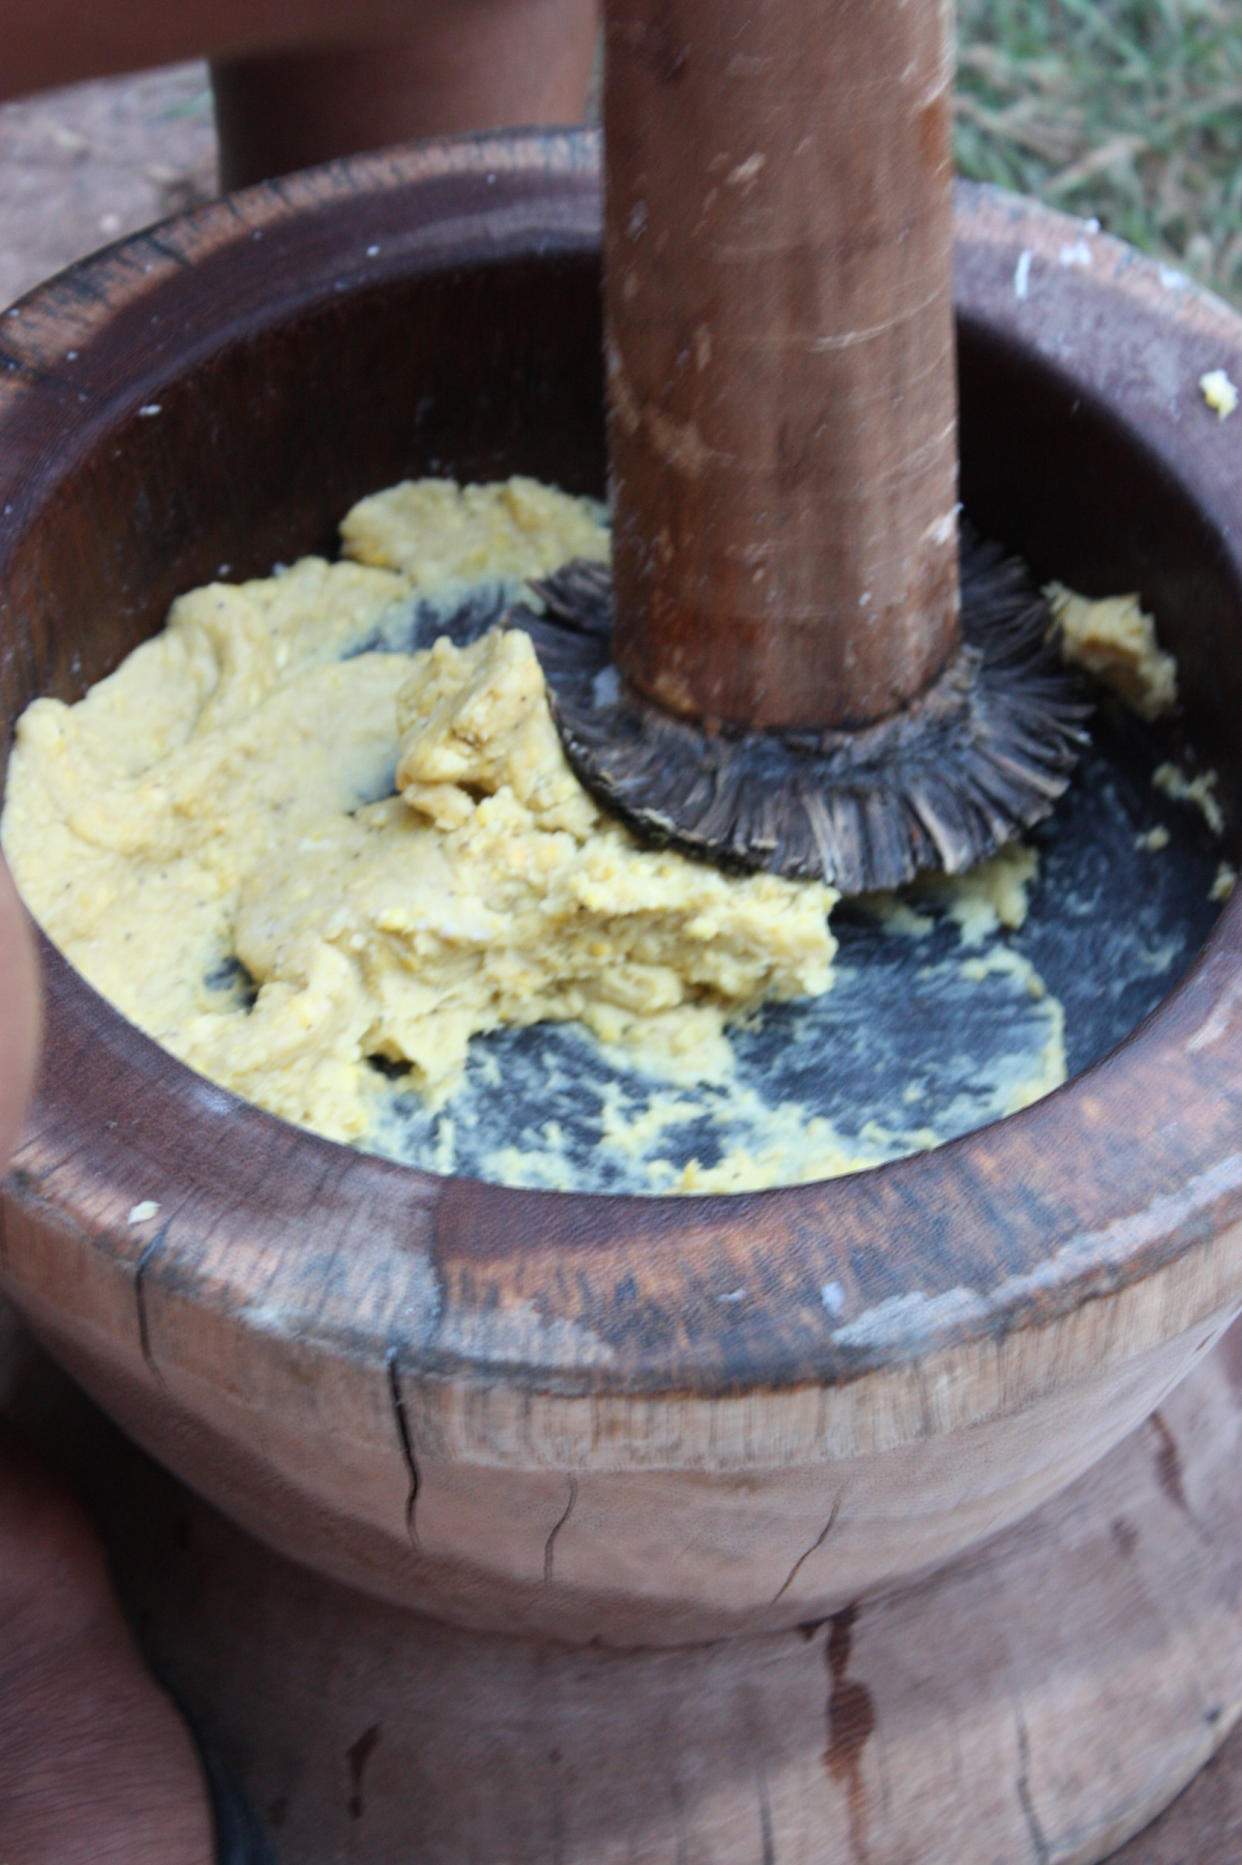 Traditionally, fufu is still made by hand, the old-fashioned way, with a mortar and pestle. (Zoe Adjonyoh)